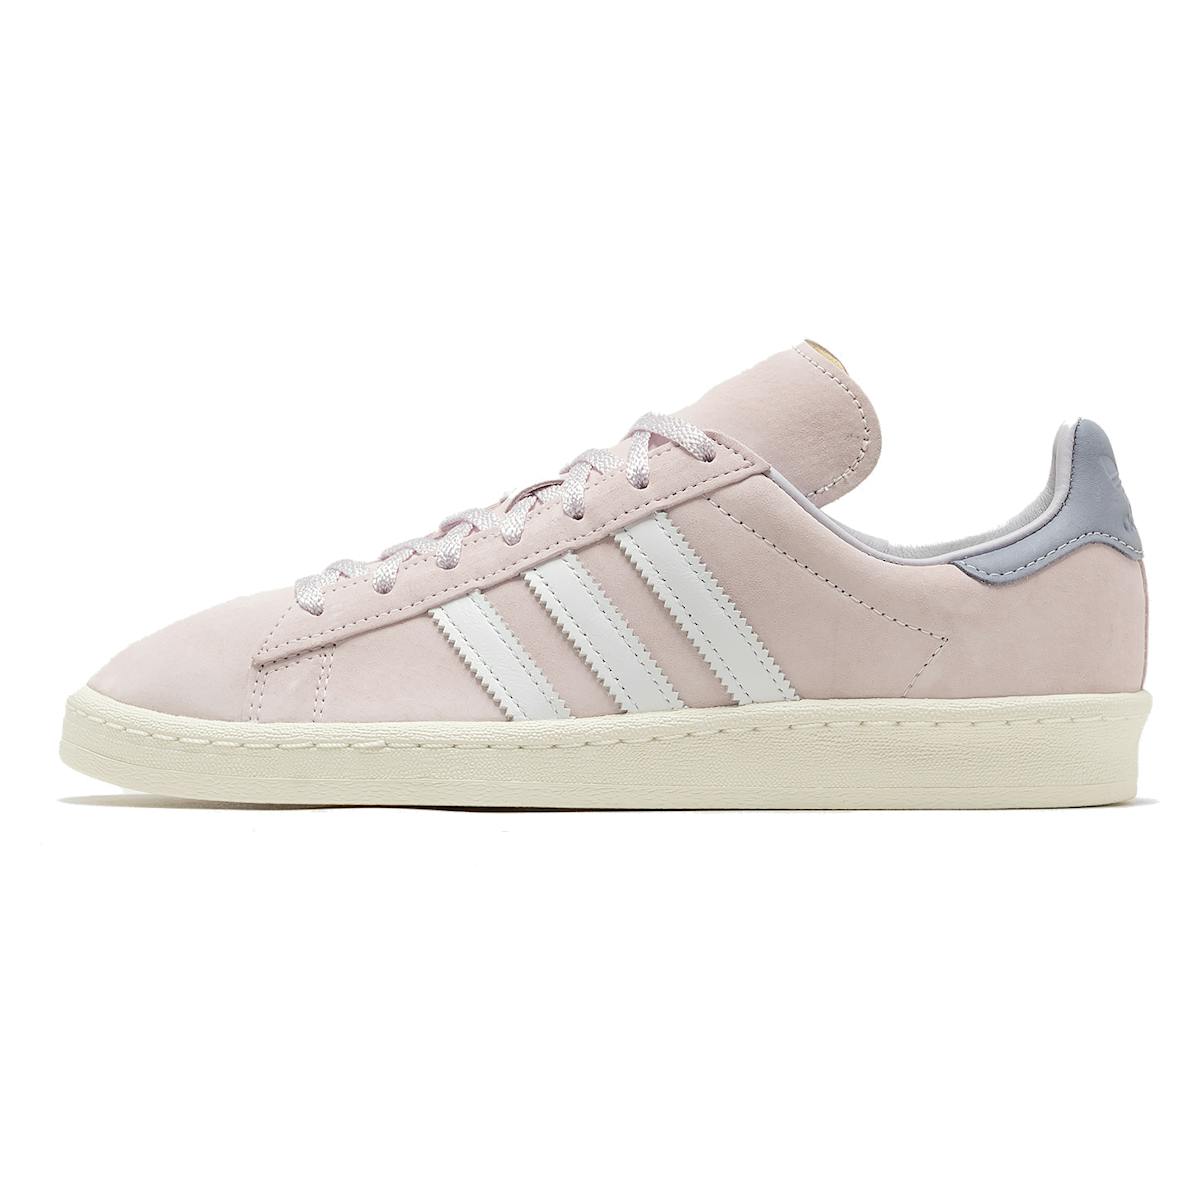 Adidas Campus 80s "Almost Pink"